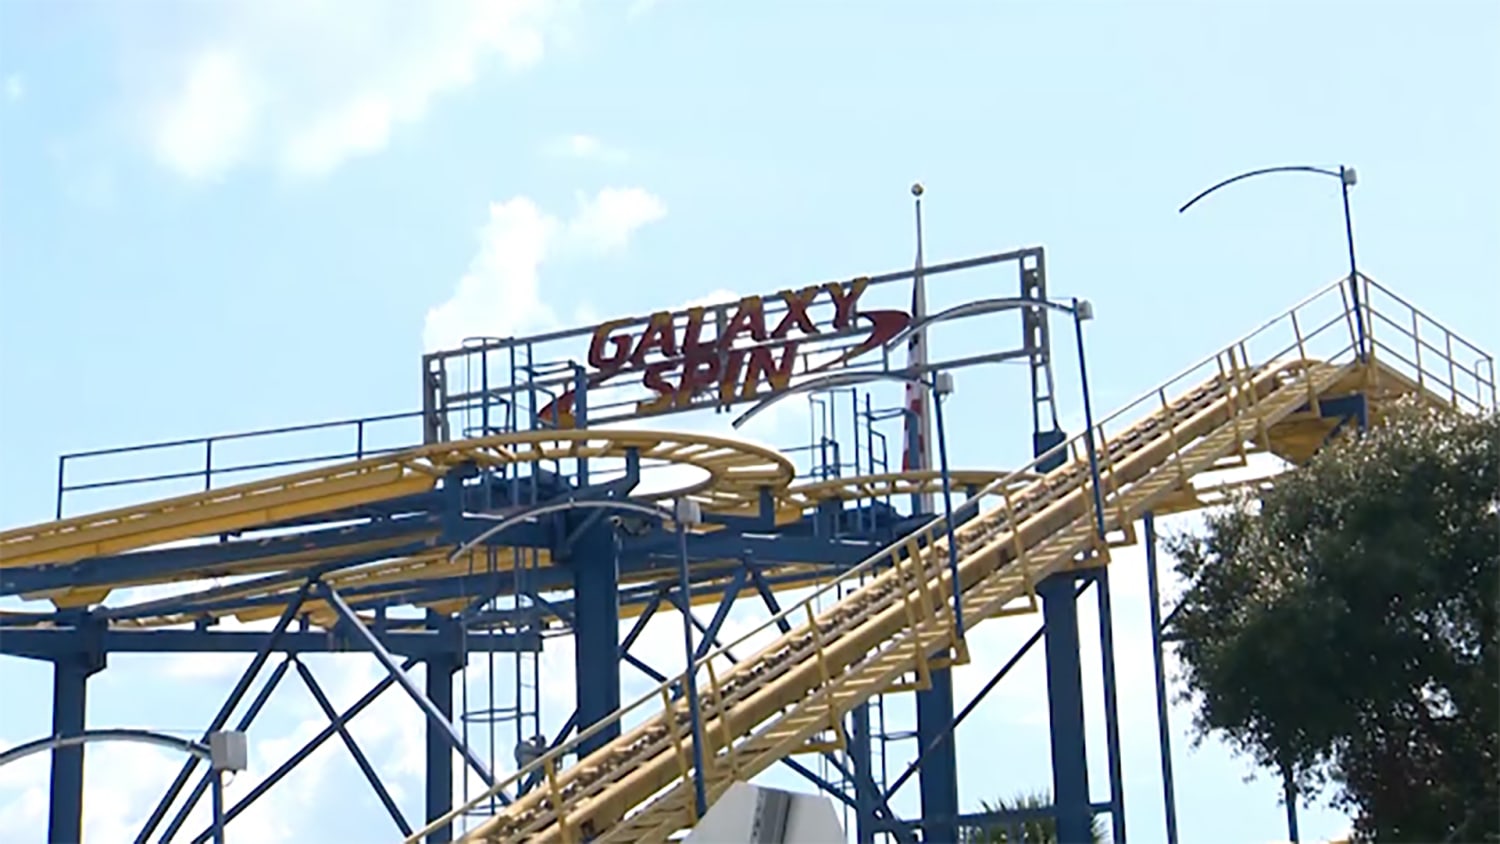 Child Nearly Flies Out of High-Speed Roller Coaster, “This Is